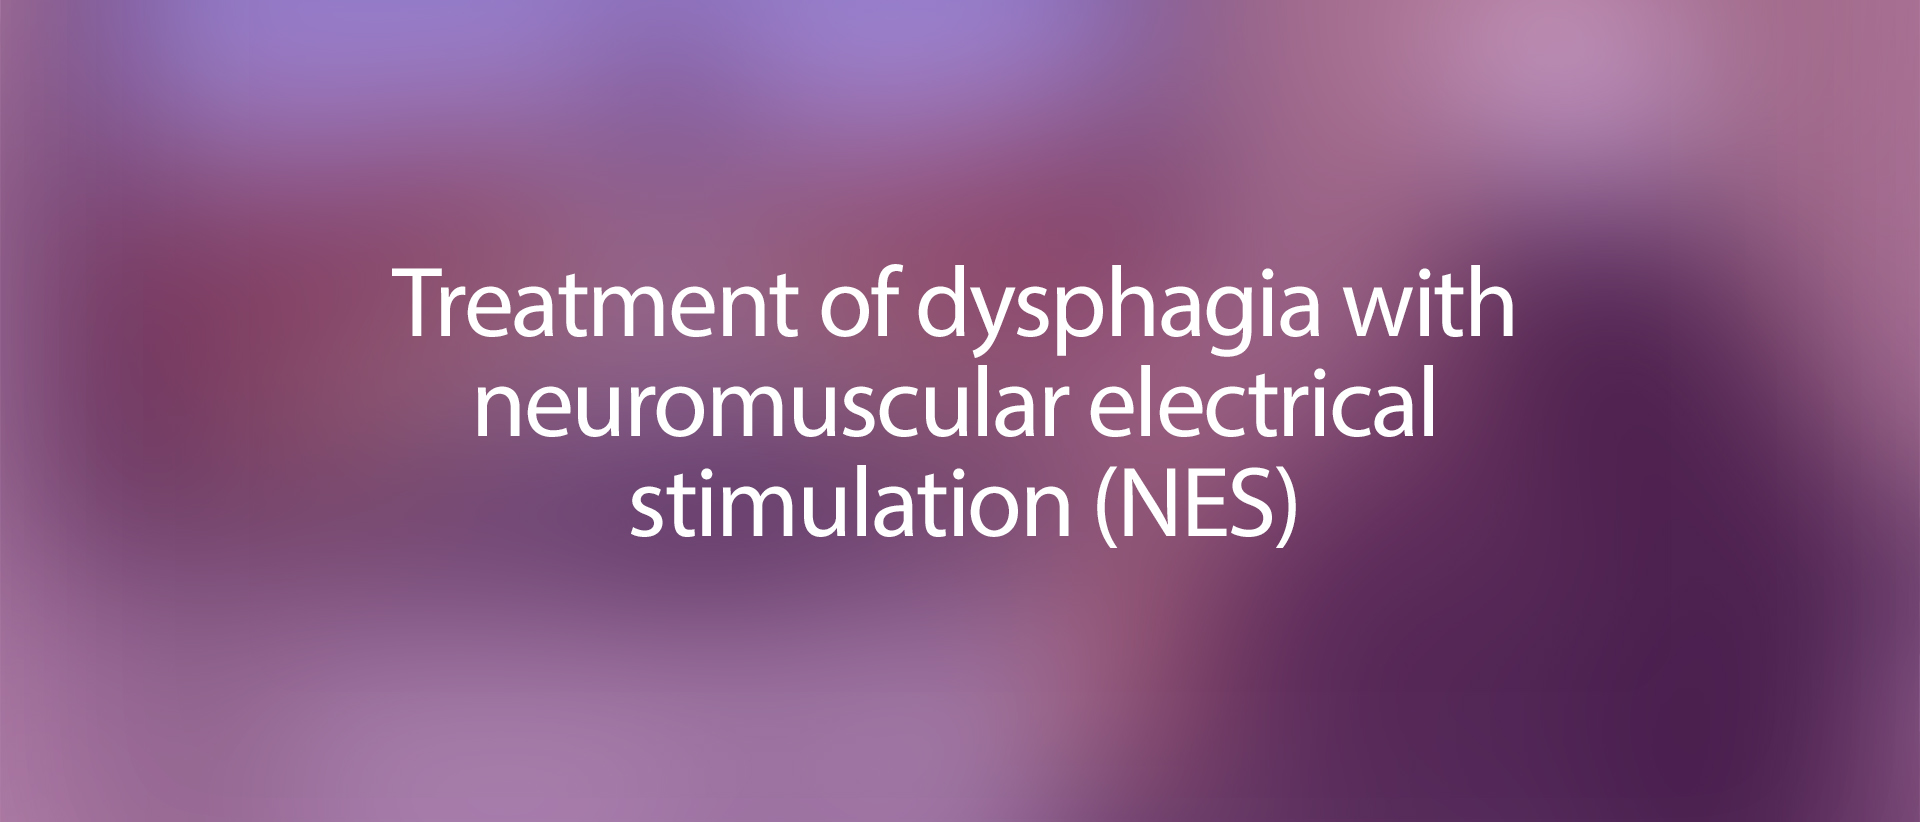 Treatment of dysphagia with neuromuscular electrical stimulation (NES) -  Guttmann Barcelona Life